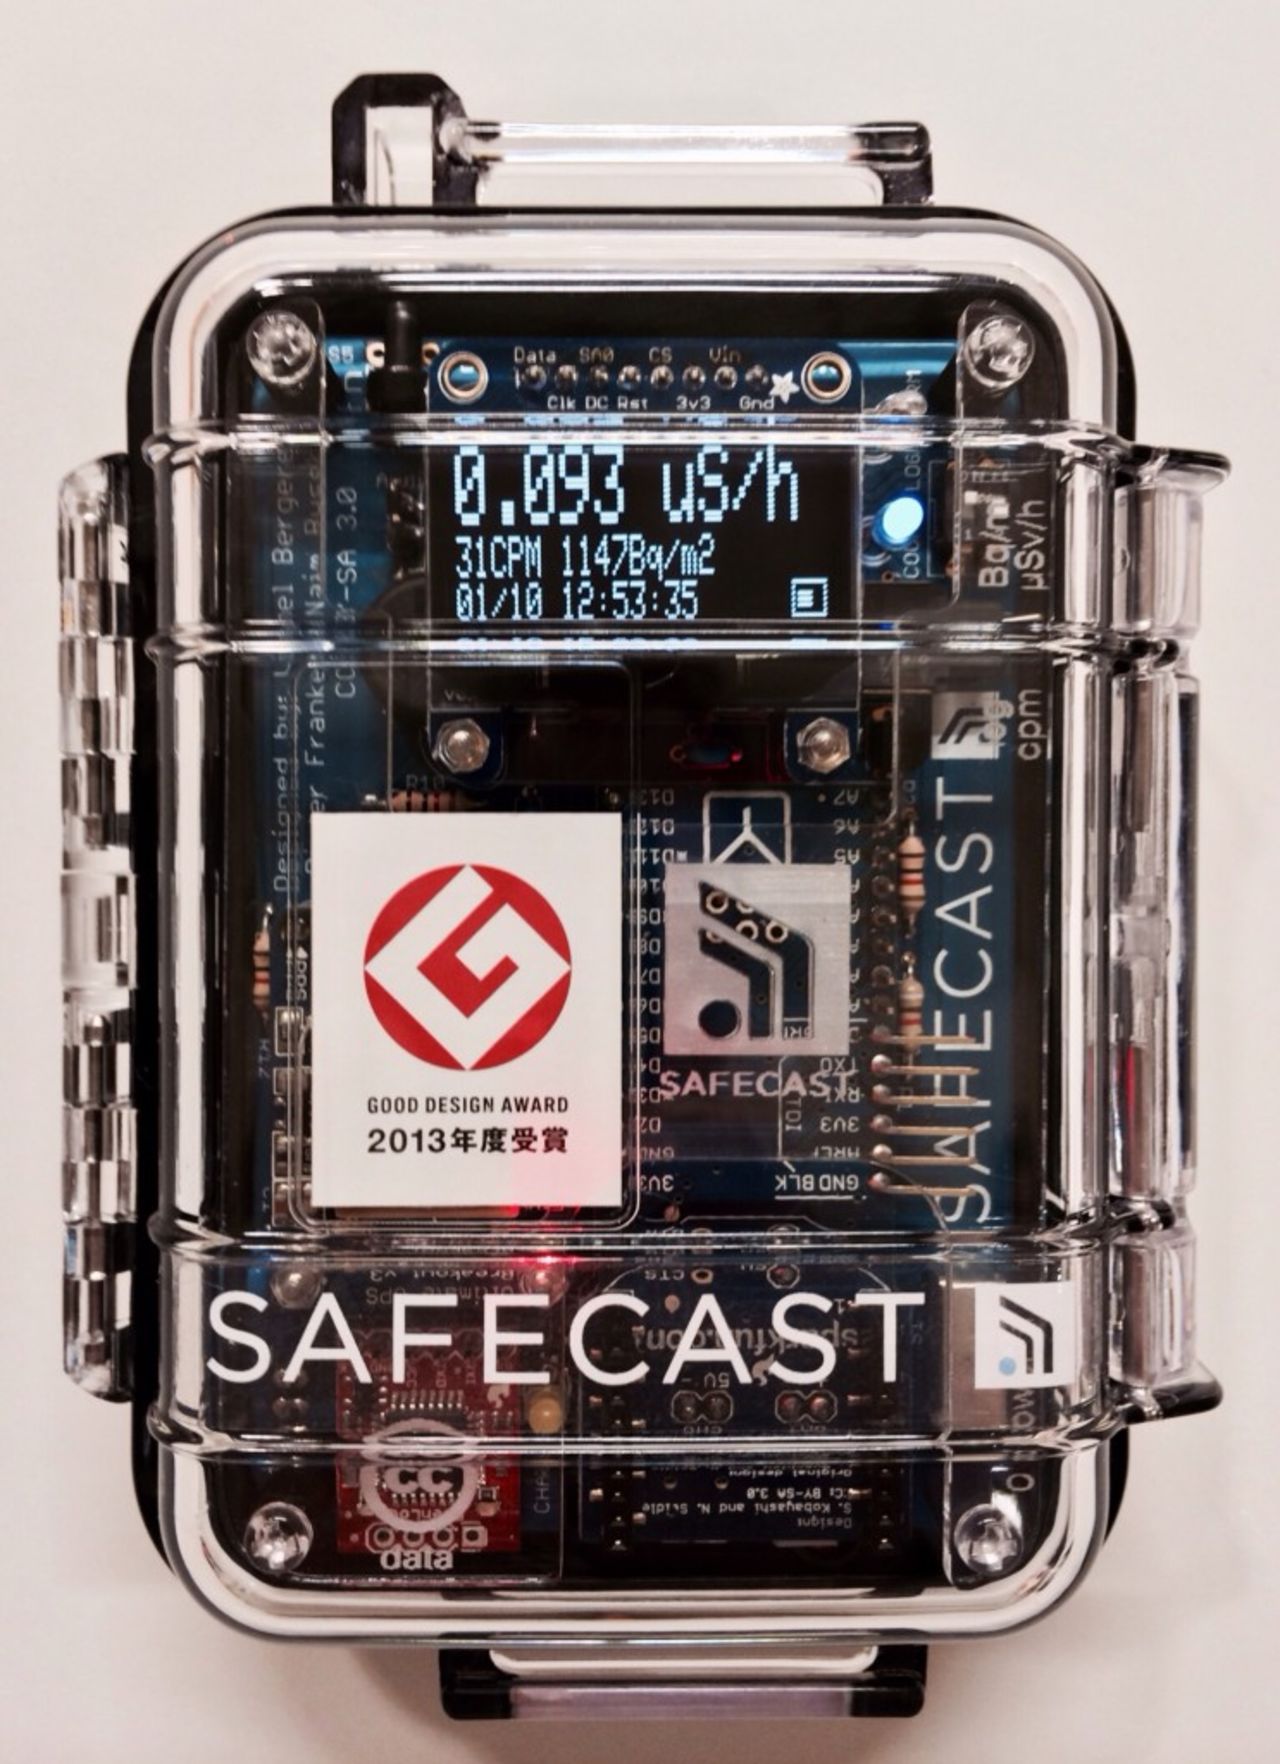 The 'Bgeigie' from Safecast was used to test conditions in Fukushima after the nuclear disaster. 